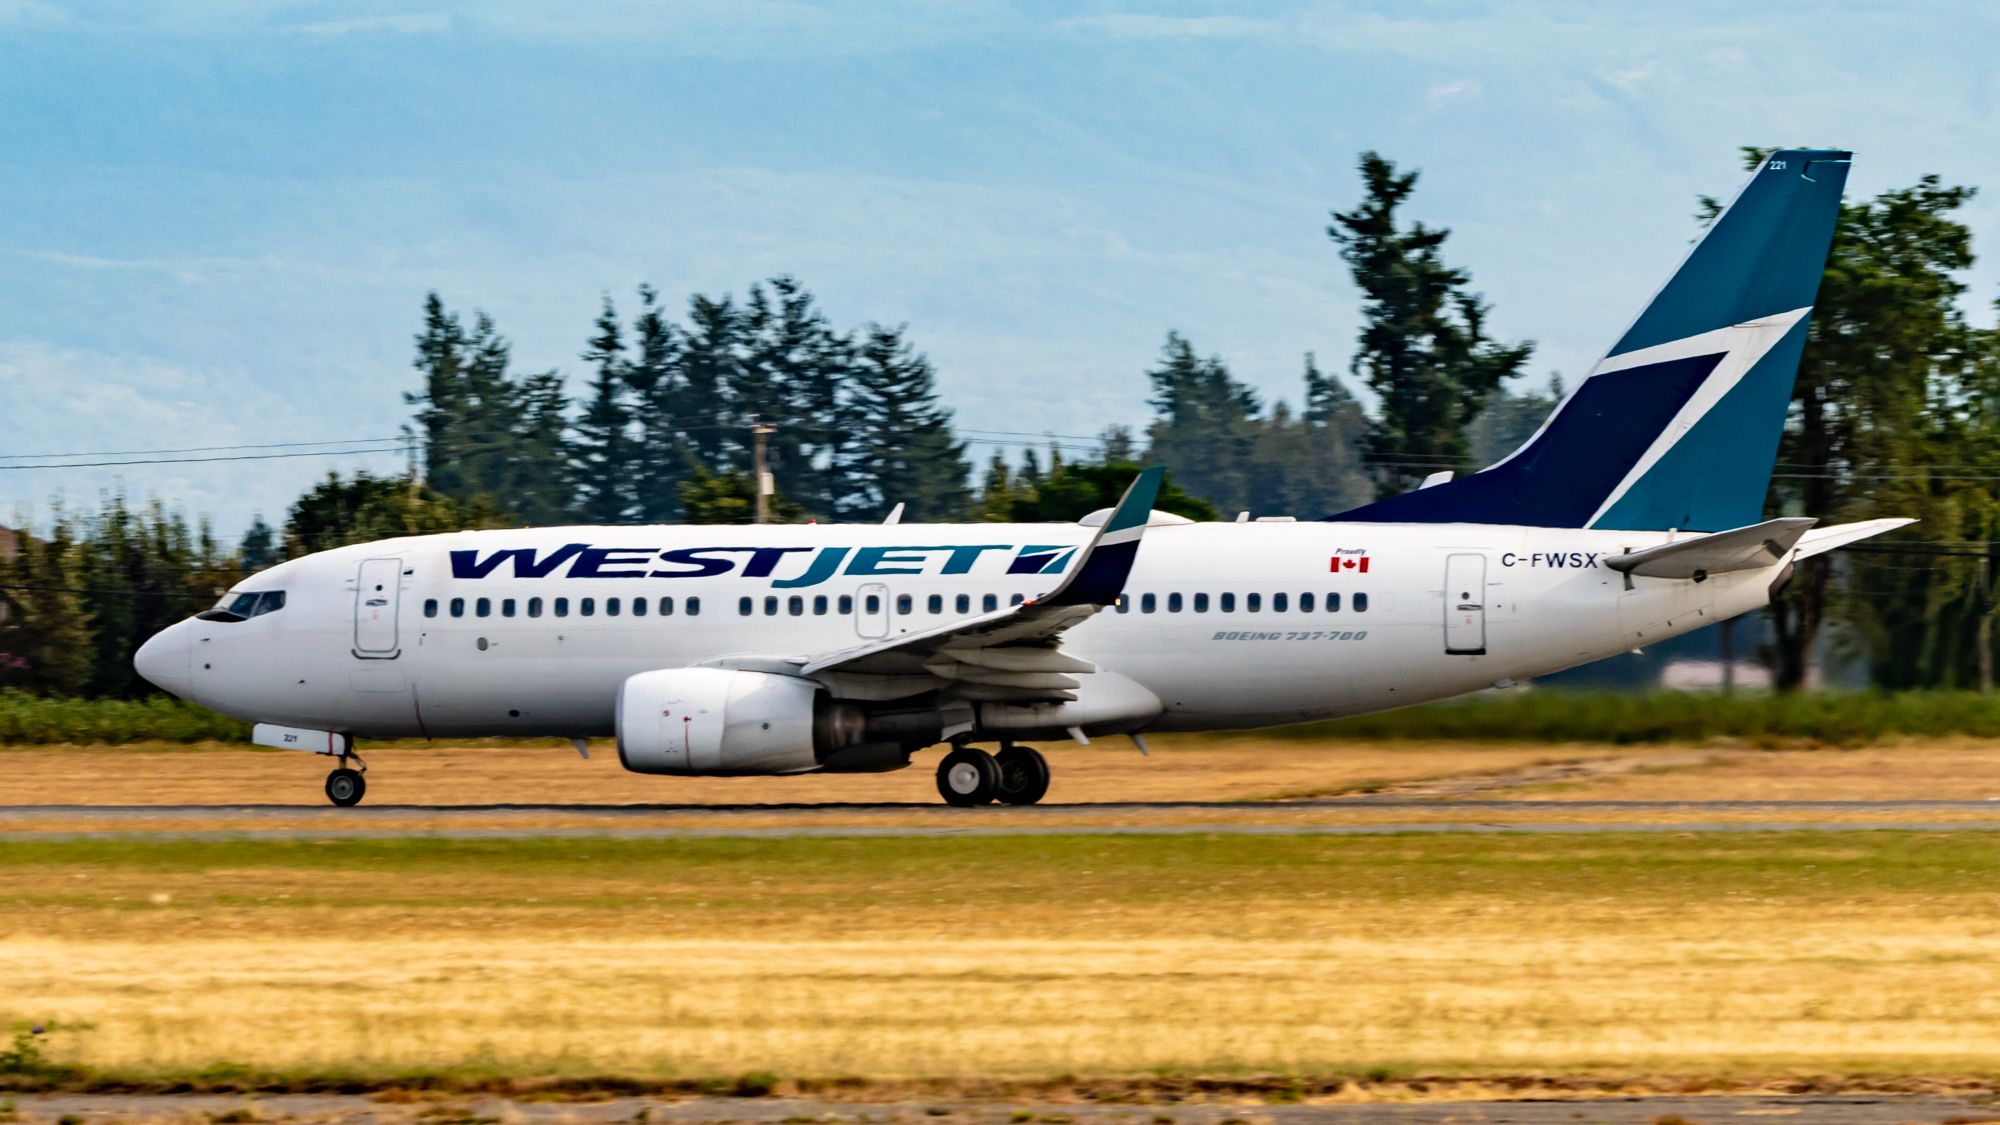 A WestJet Boeing 737-700 parked on the ground.